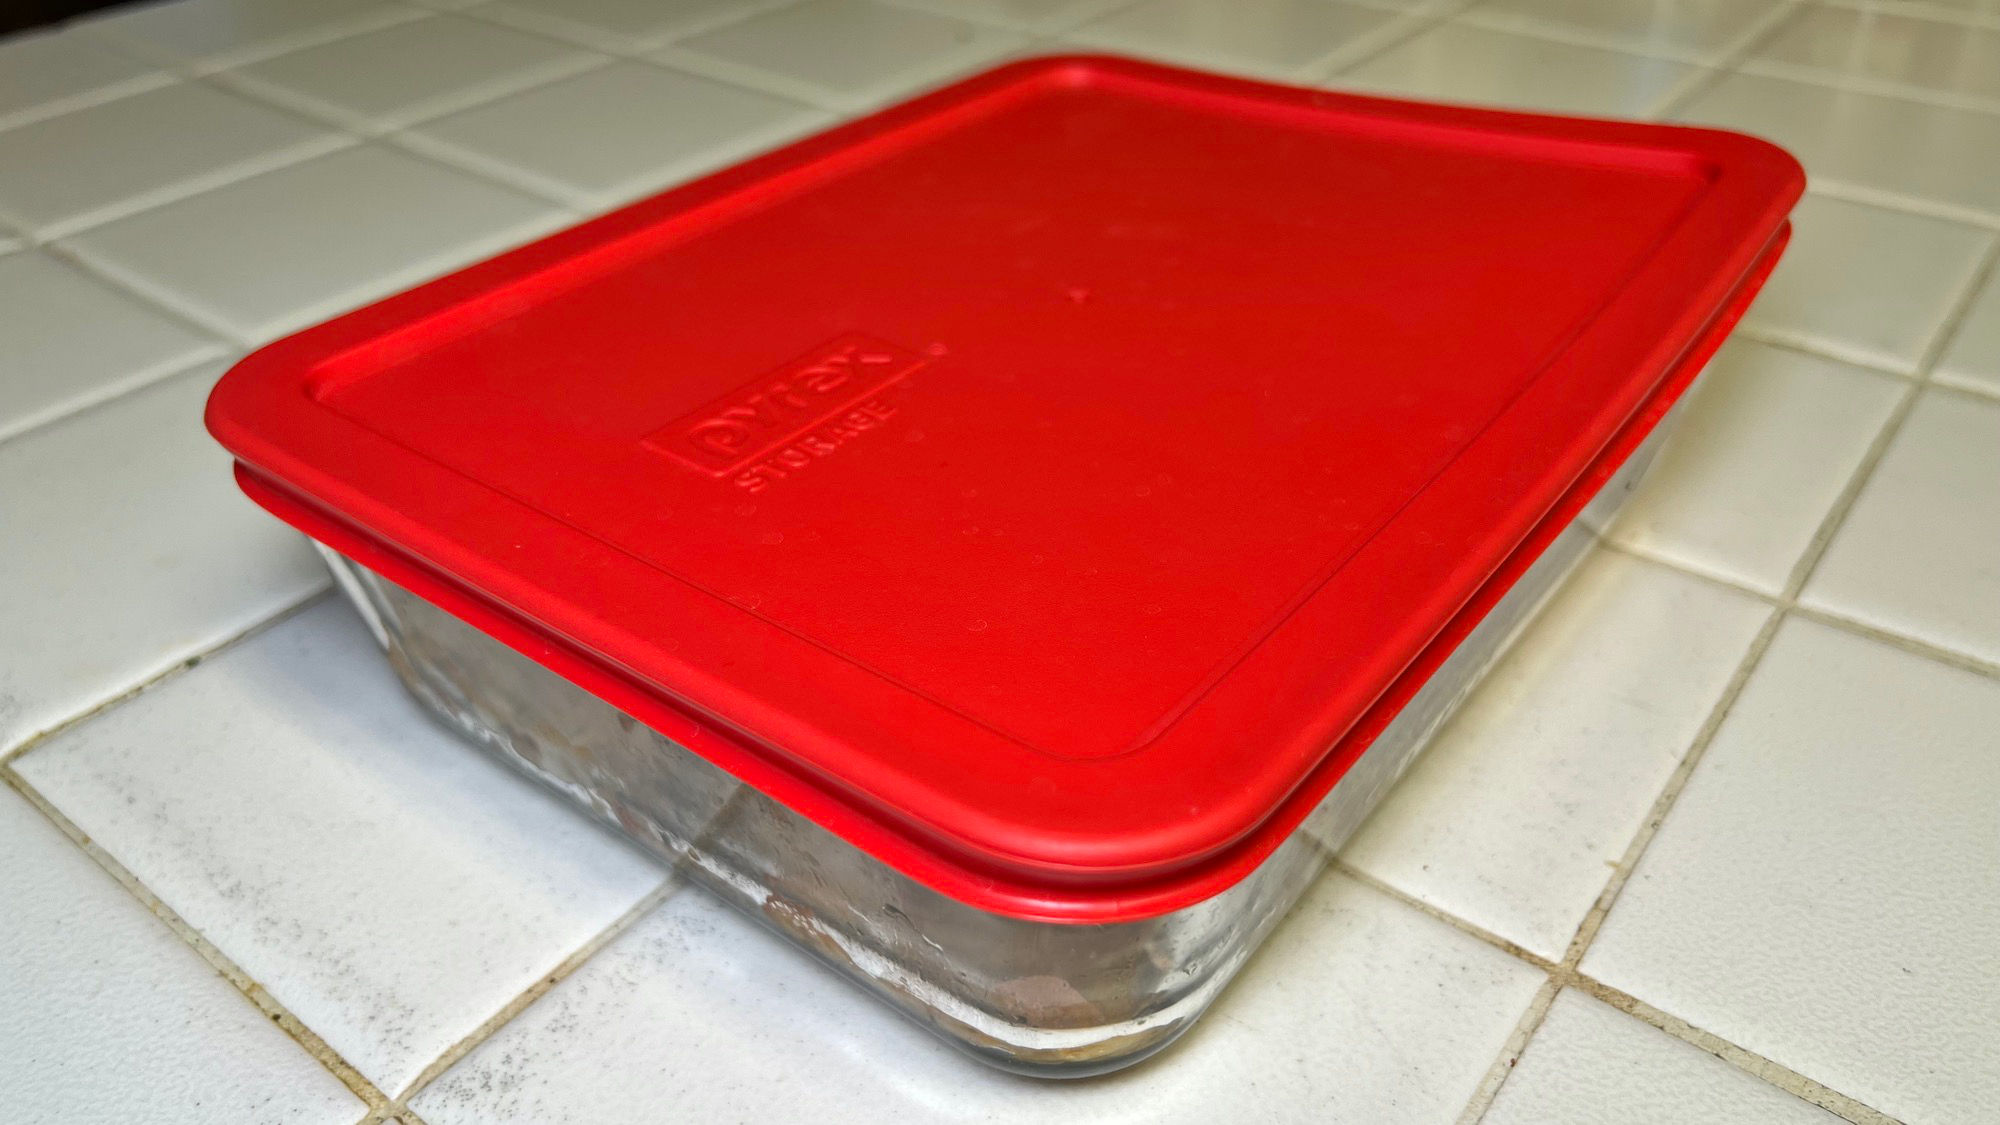 https://www.eatlife.net/want/images/pyrex-6-cup-storage-container.jpg